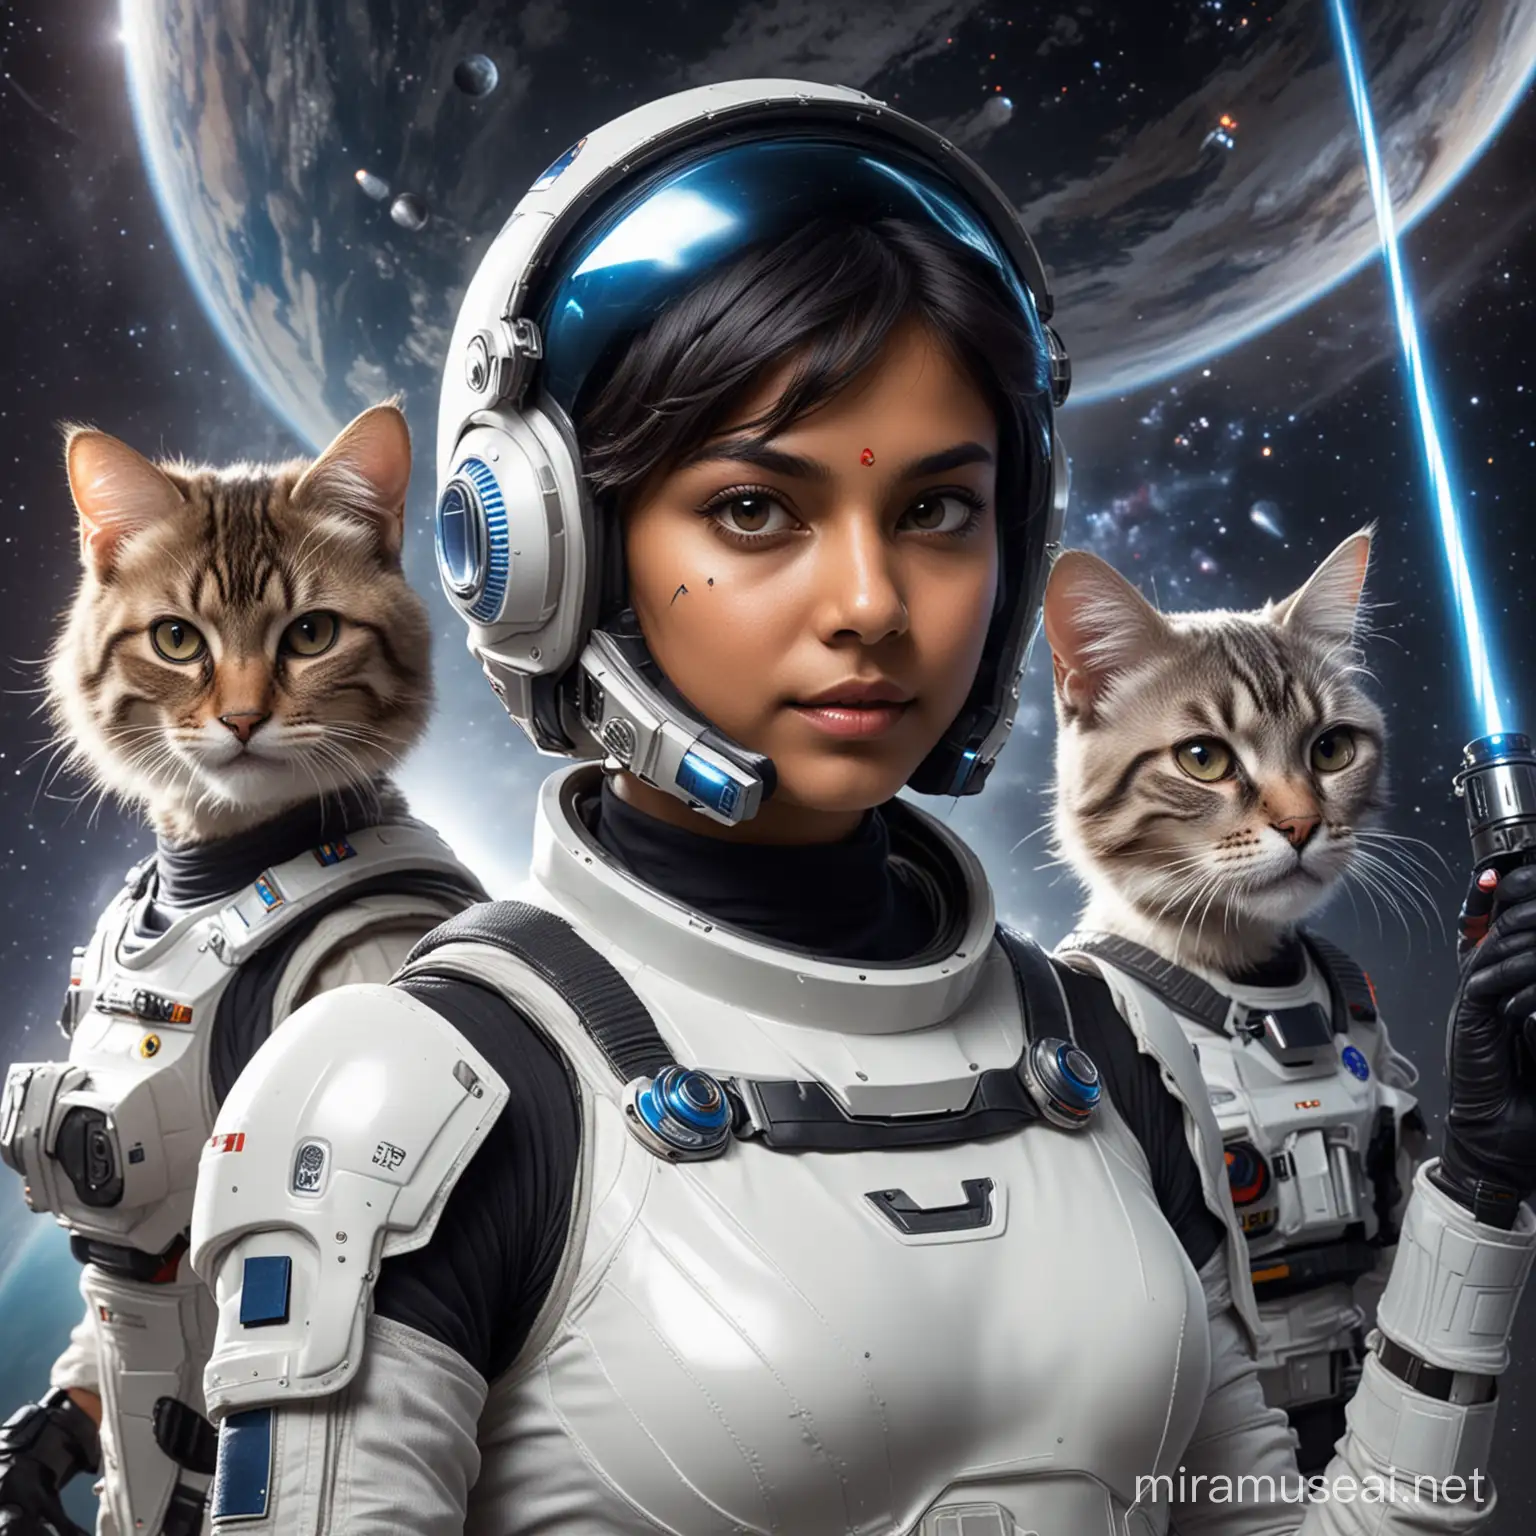 two cats in space suit, syoung beautifull indian girl in space suit, short hair hidden in helmet, closed visor, neptune in background, lightsaber in handpaceship in background